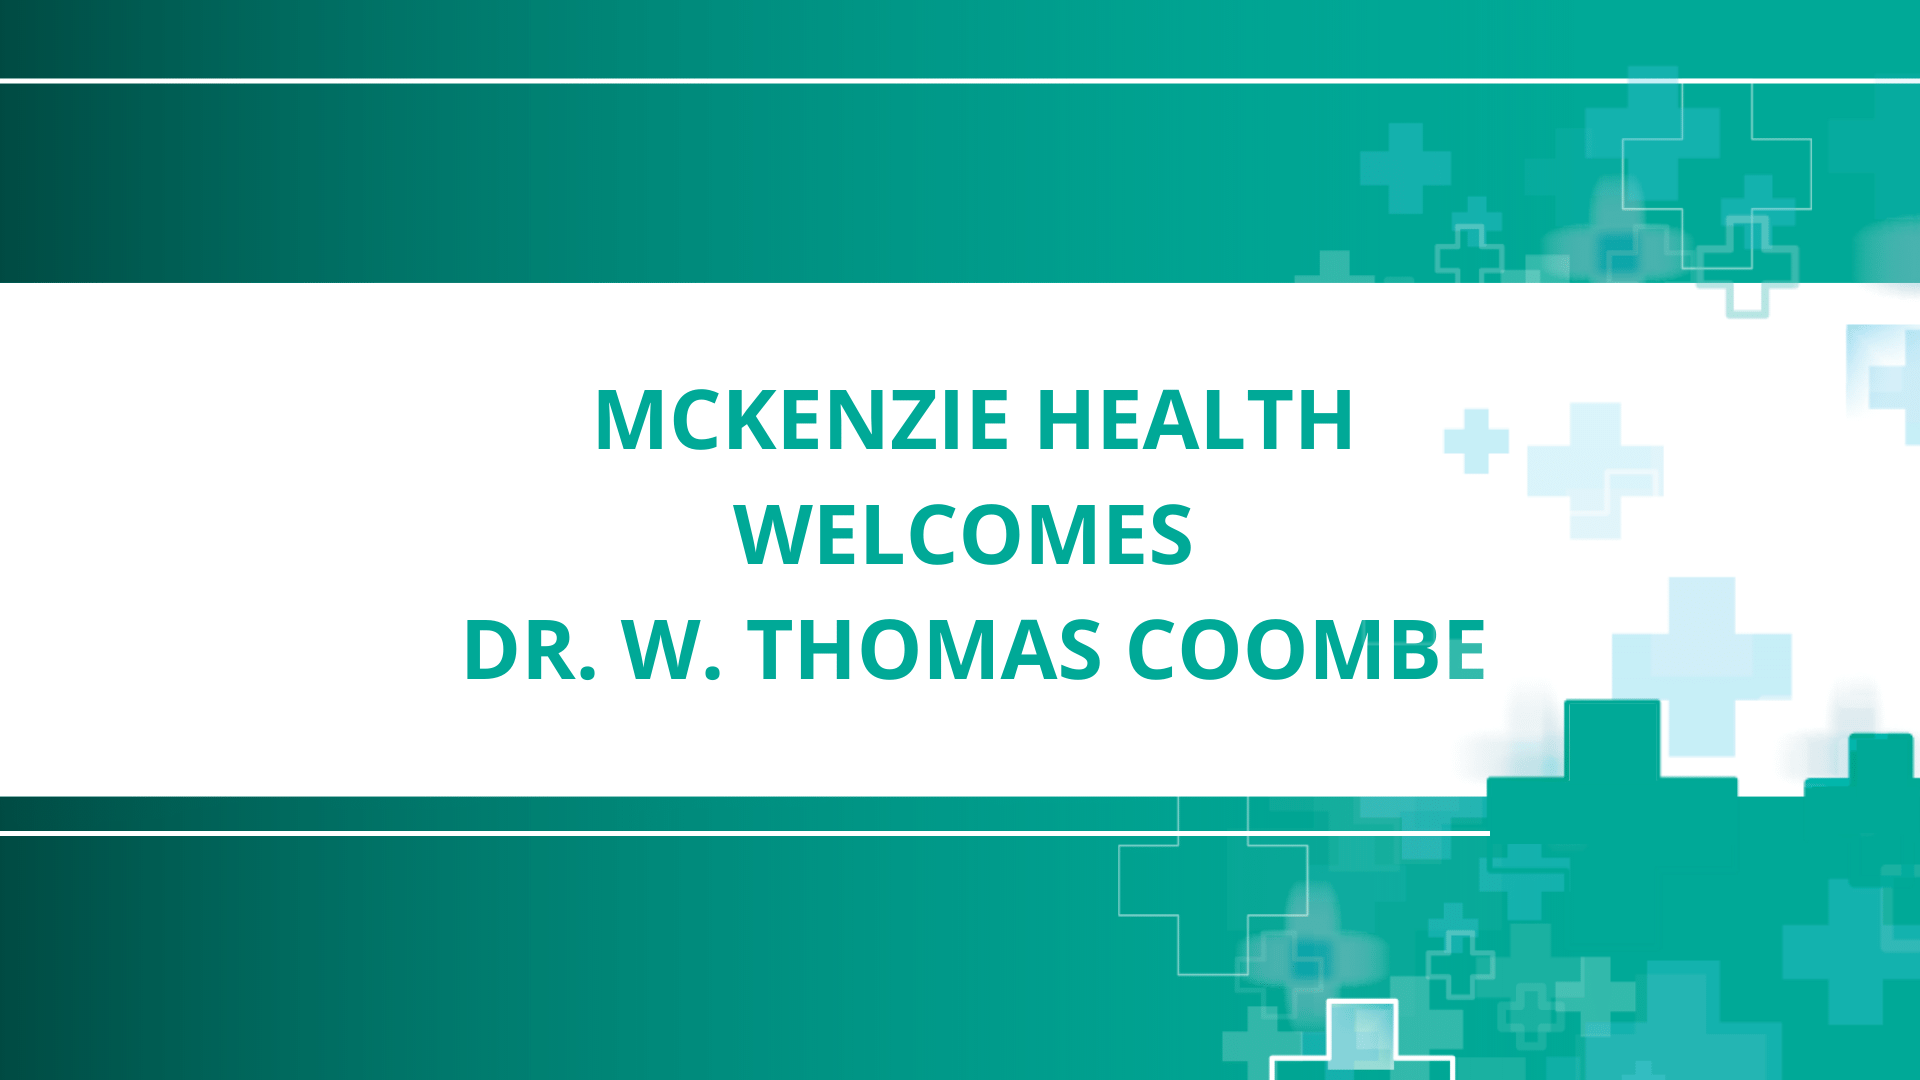 Dr. W. Thomas Coombe Joins McKenzie Health